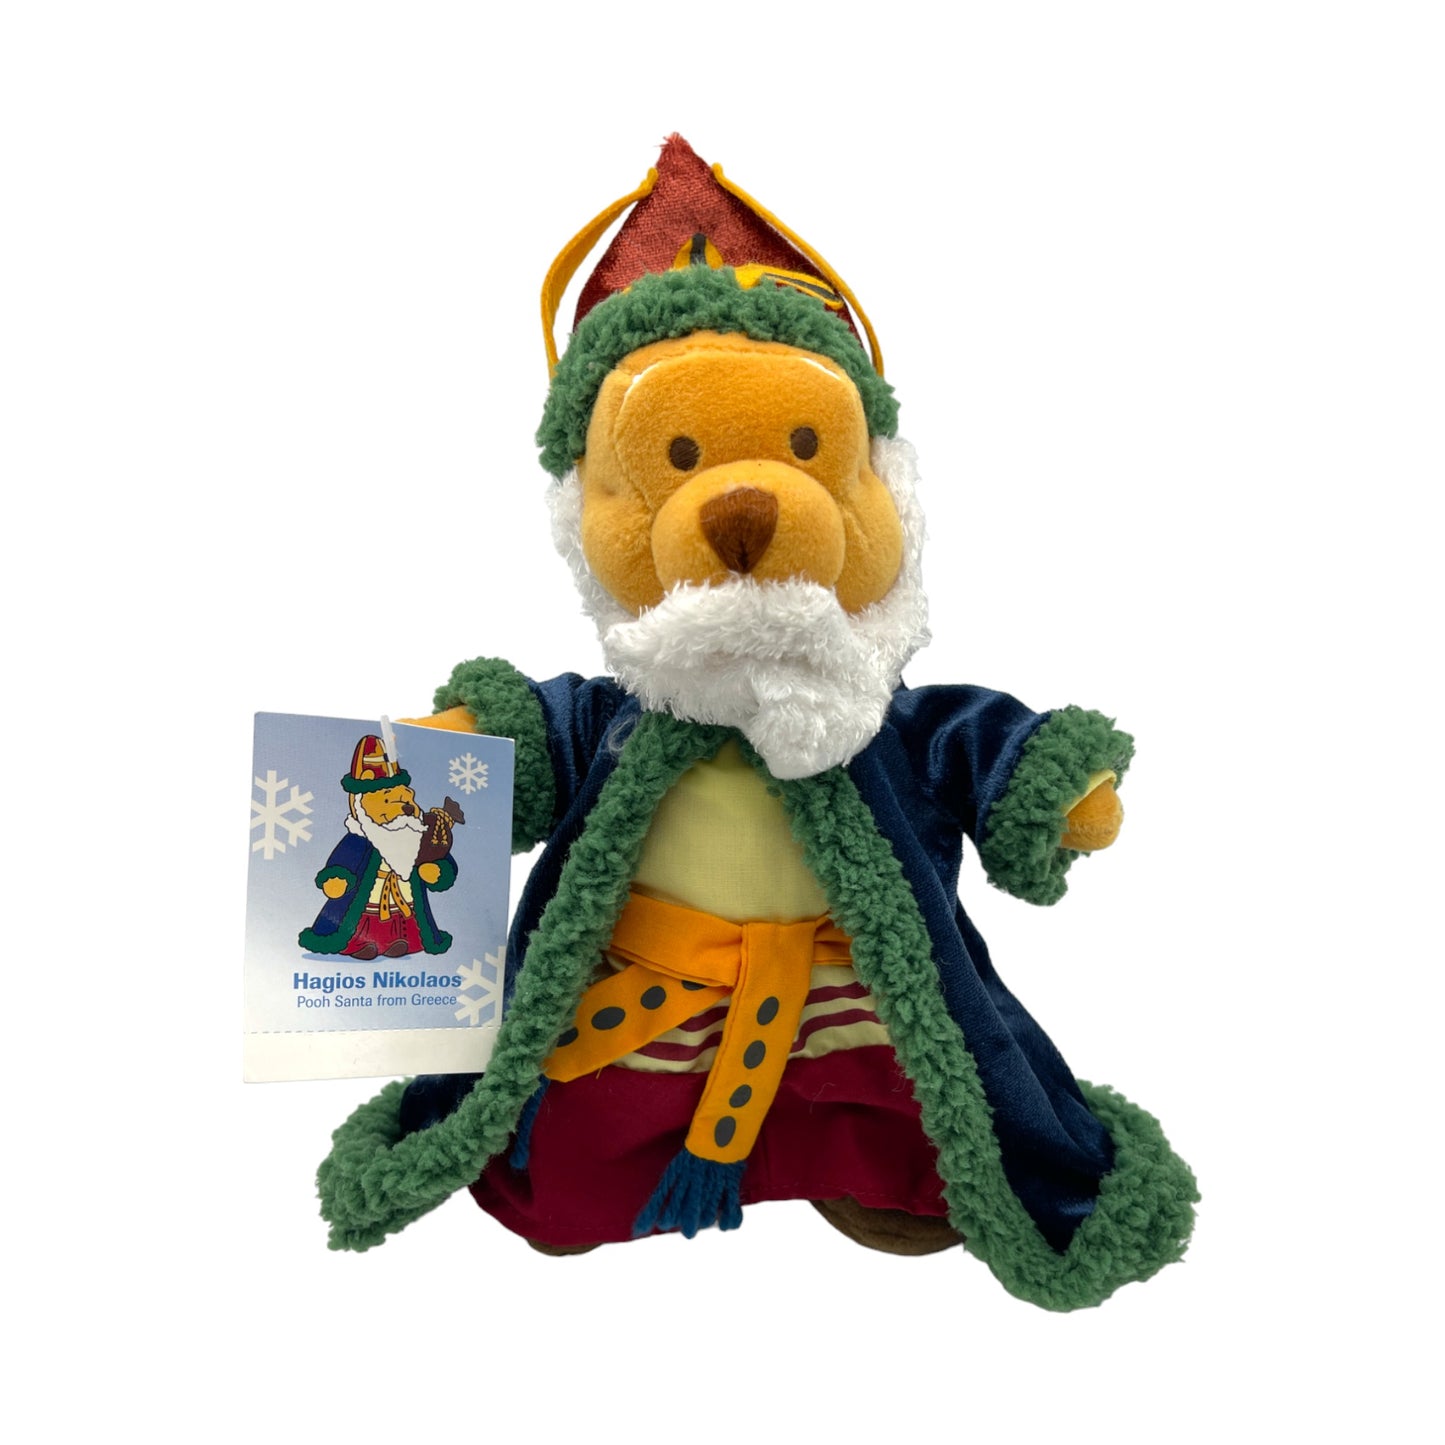 Disney Store - Pooh Santa From Greece - #8 In Series - With Tag - 8"